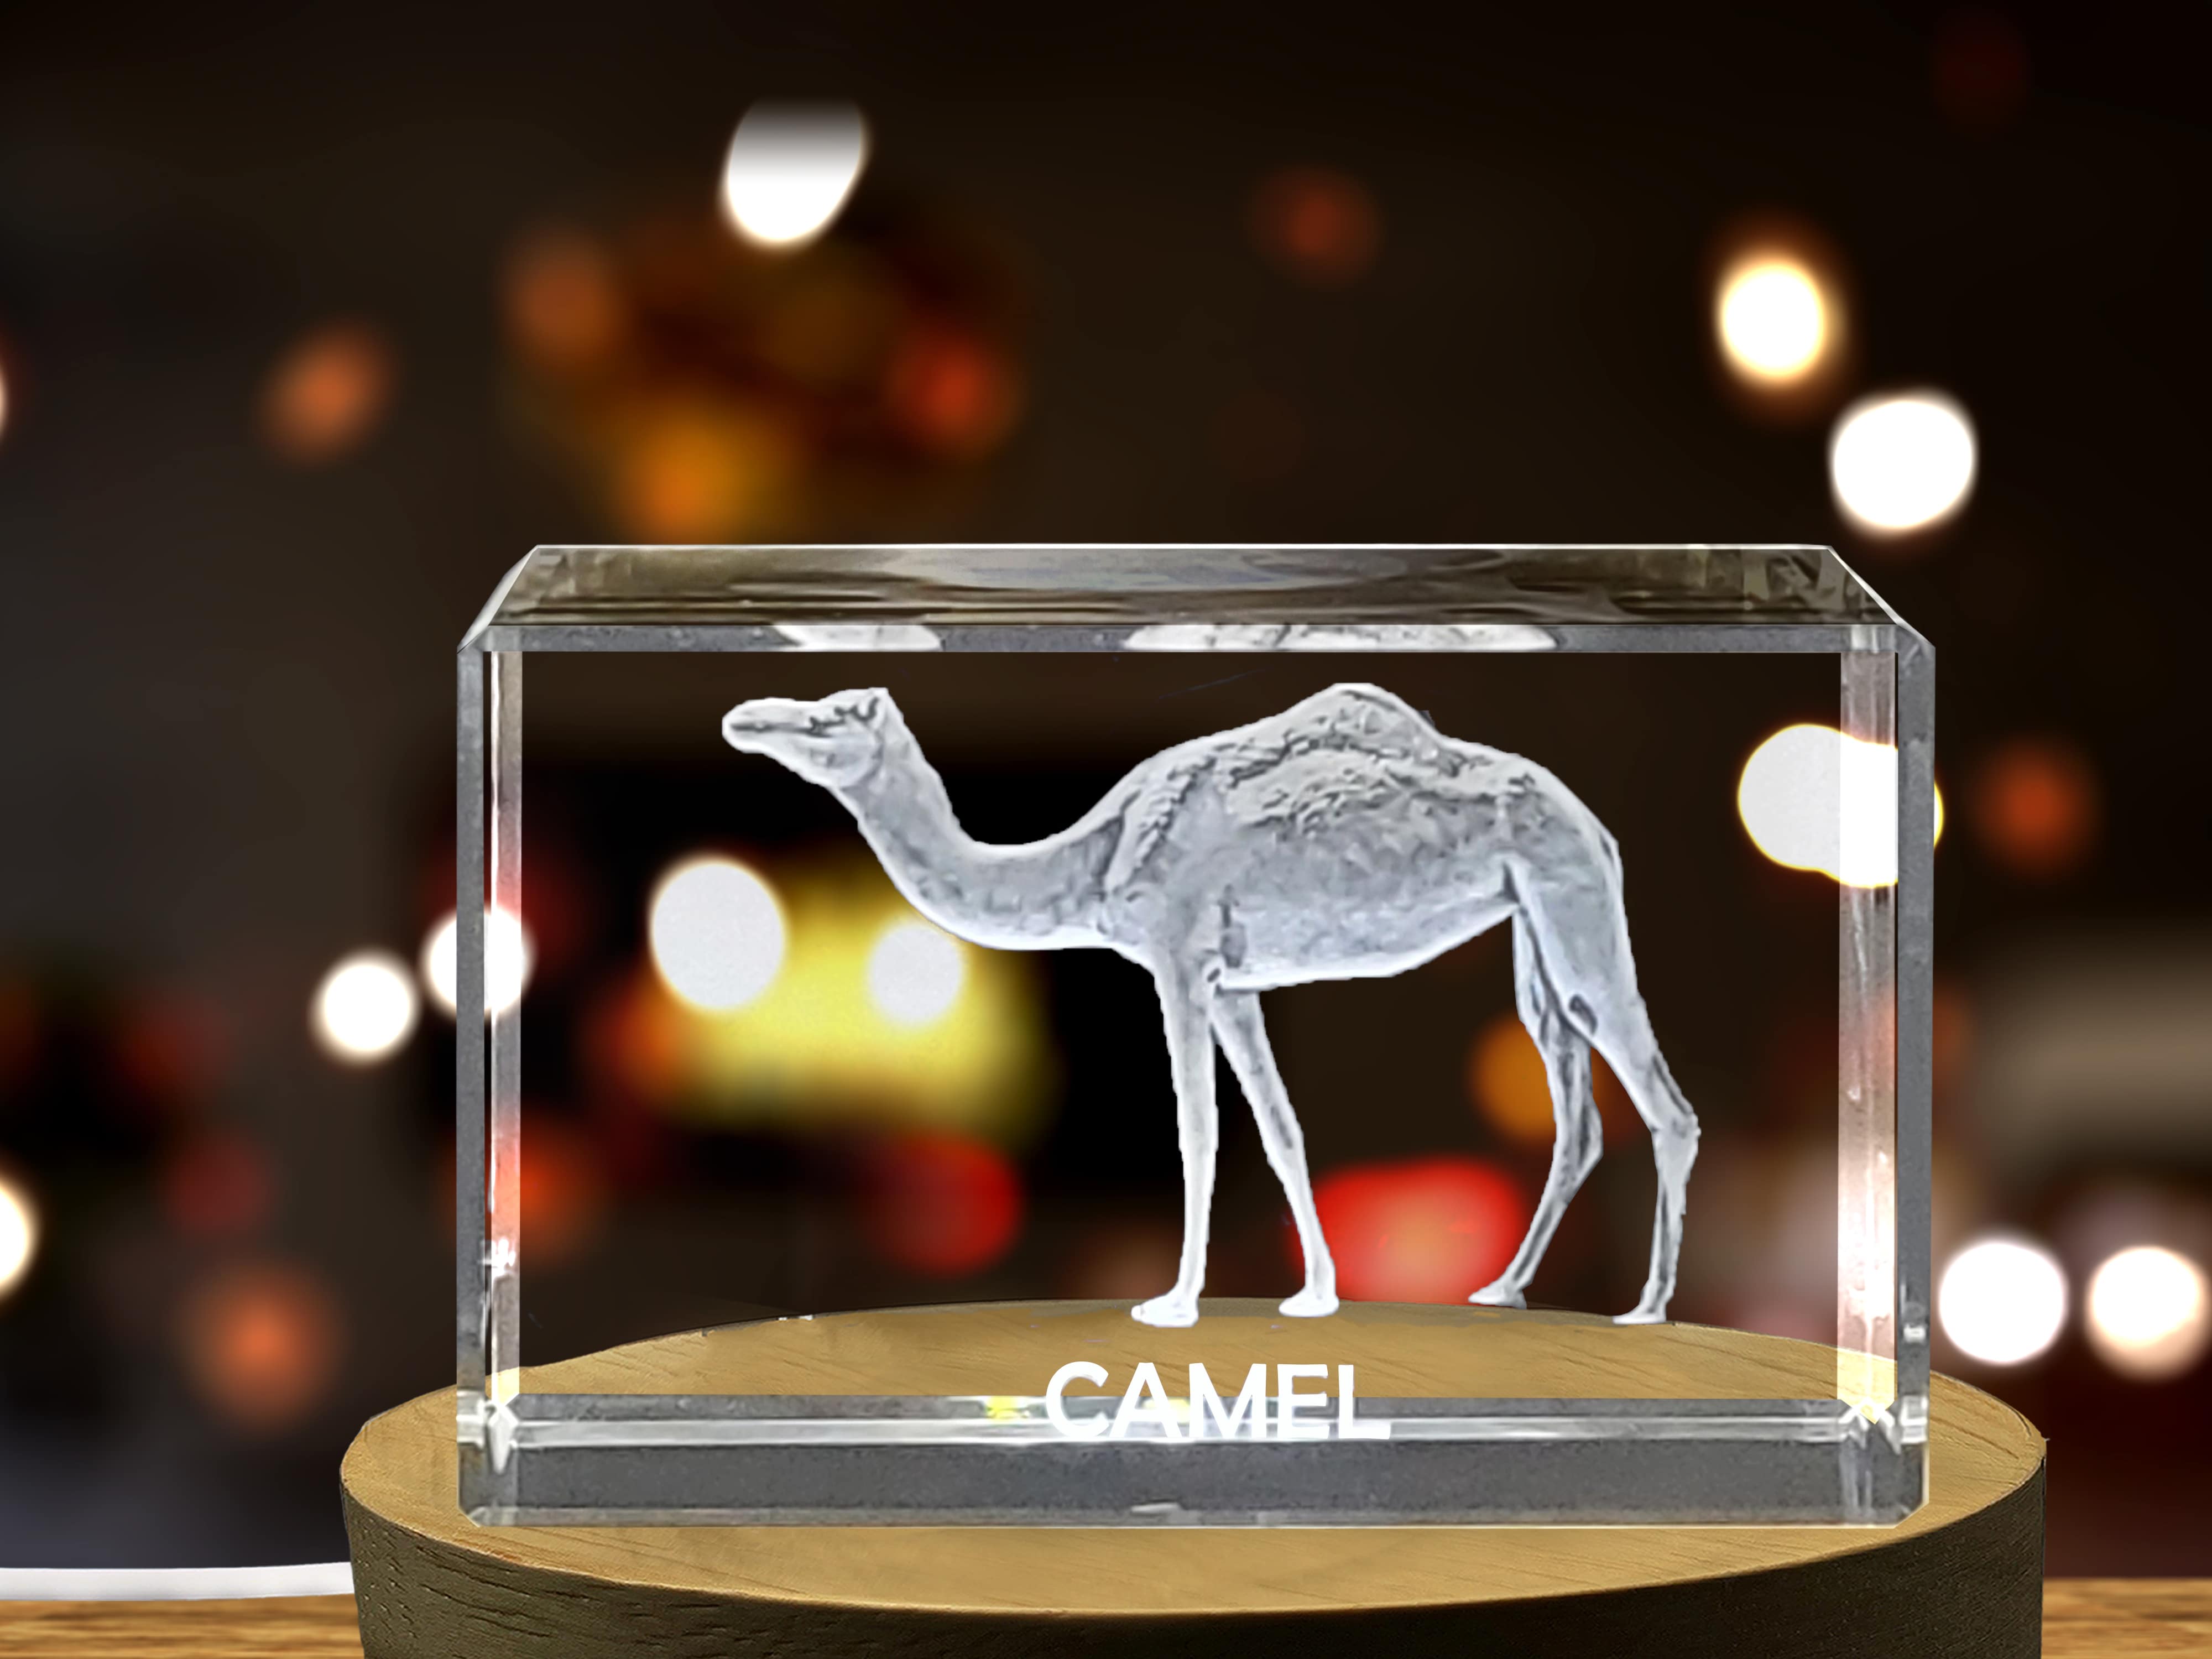 Unique 3D Engraved Crystal with Camel Design - Perfect Gift for Animal Lovers A&B Crystal Collection